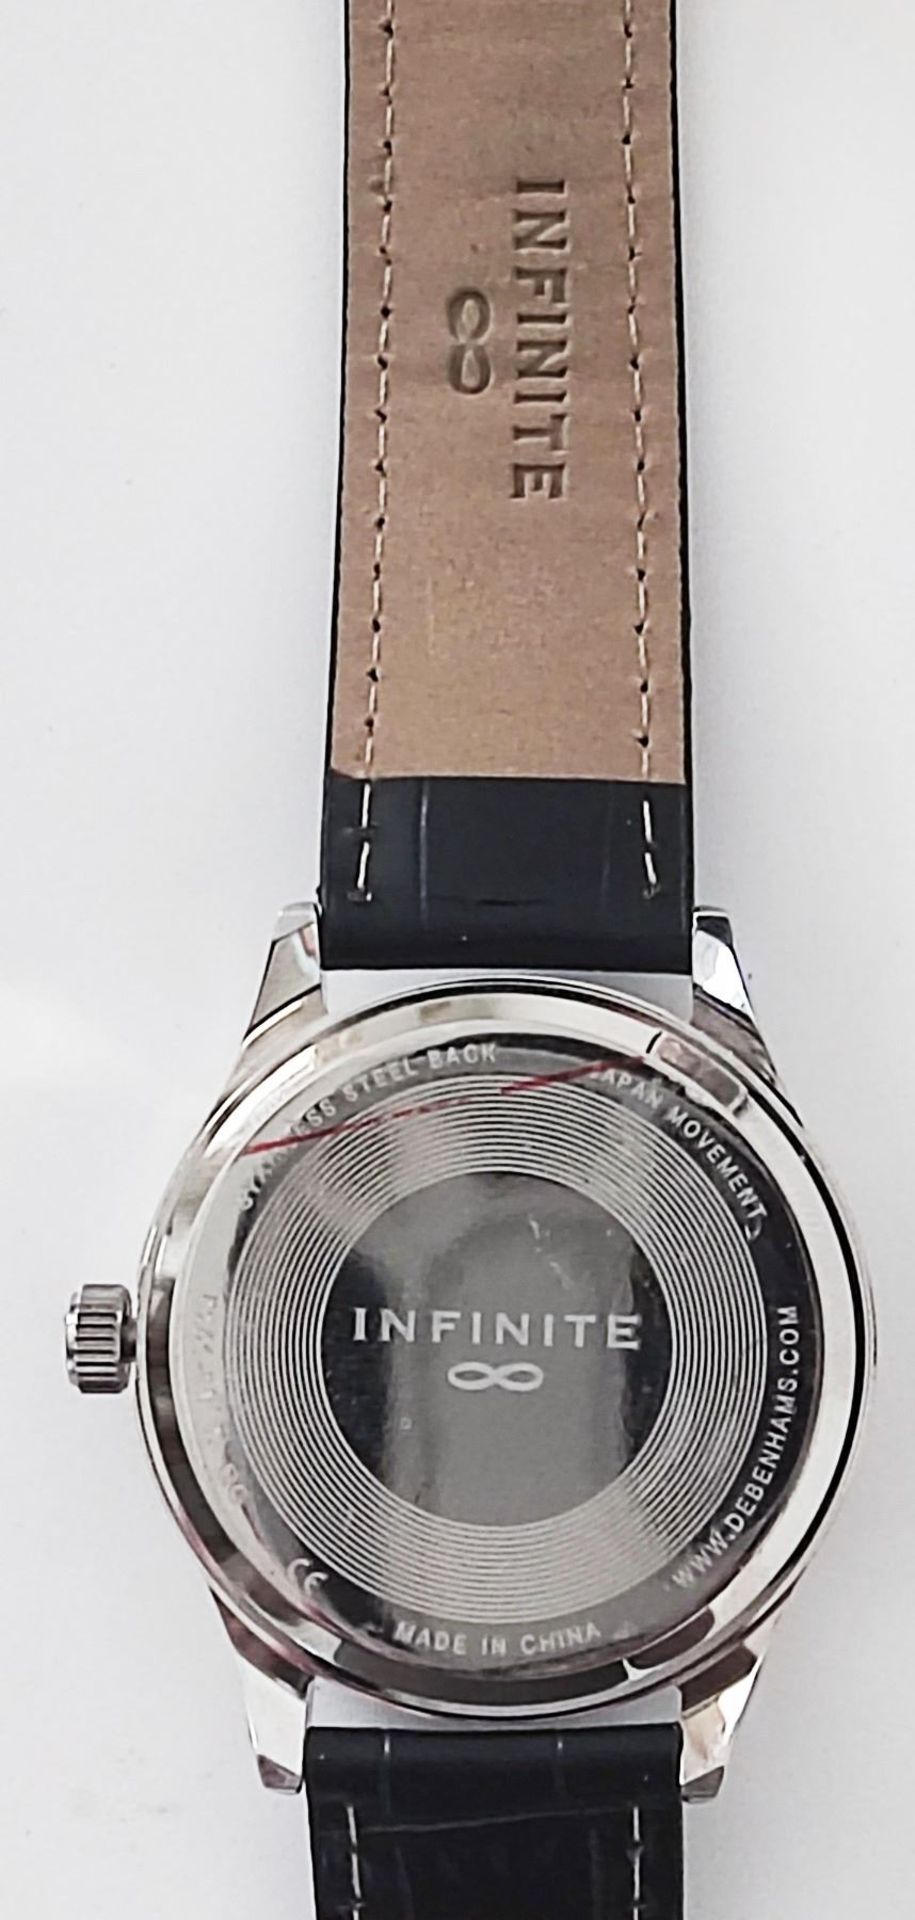 Gent's Infinite sports wristwatch (5241-60) new with infinite tag. - Image 3 of 3